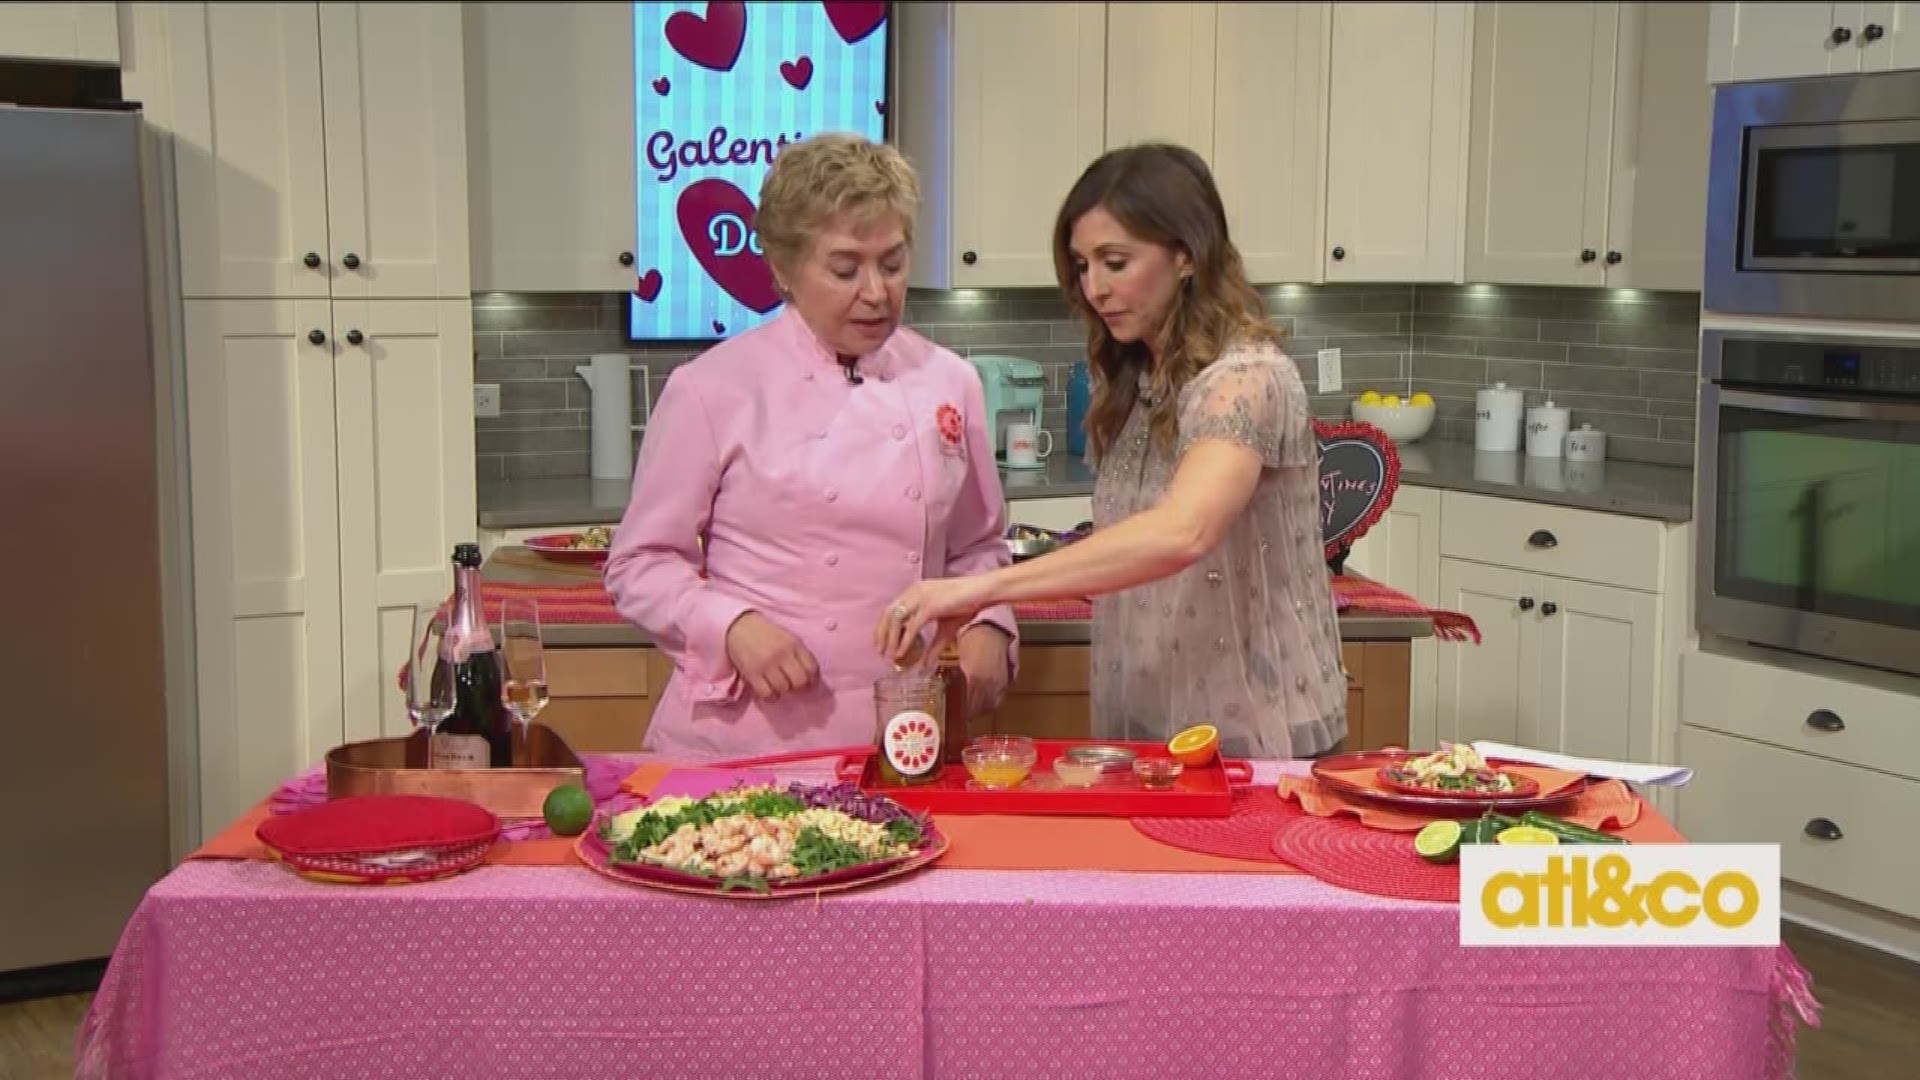 Galentine's Day inspiration with Chef Nancy from Taste and Savor